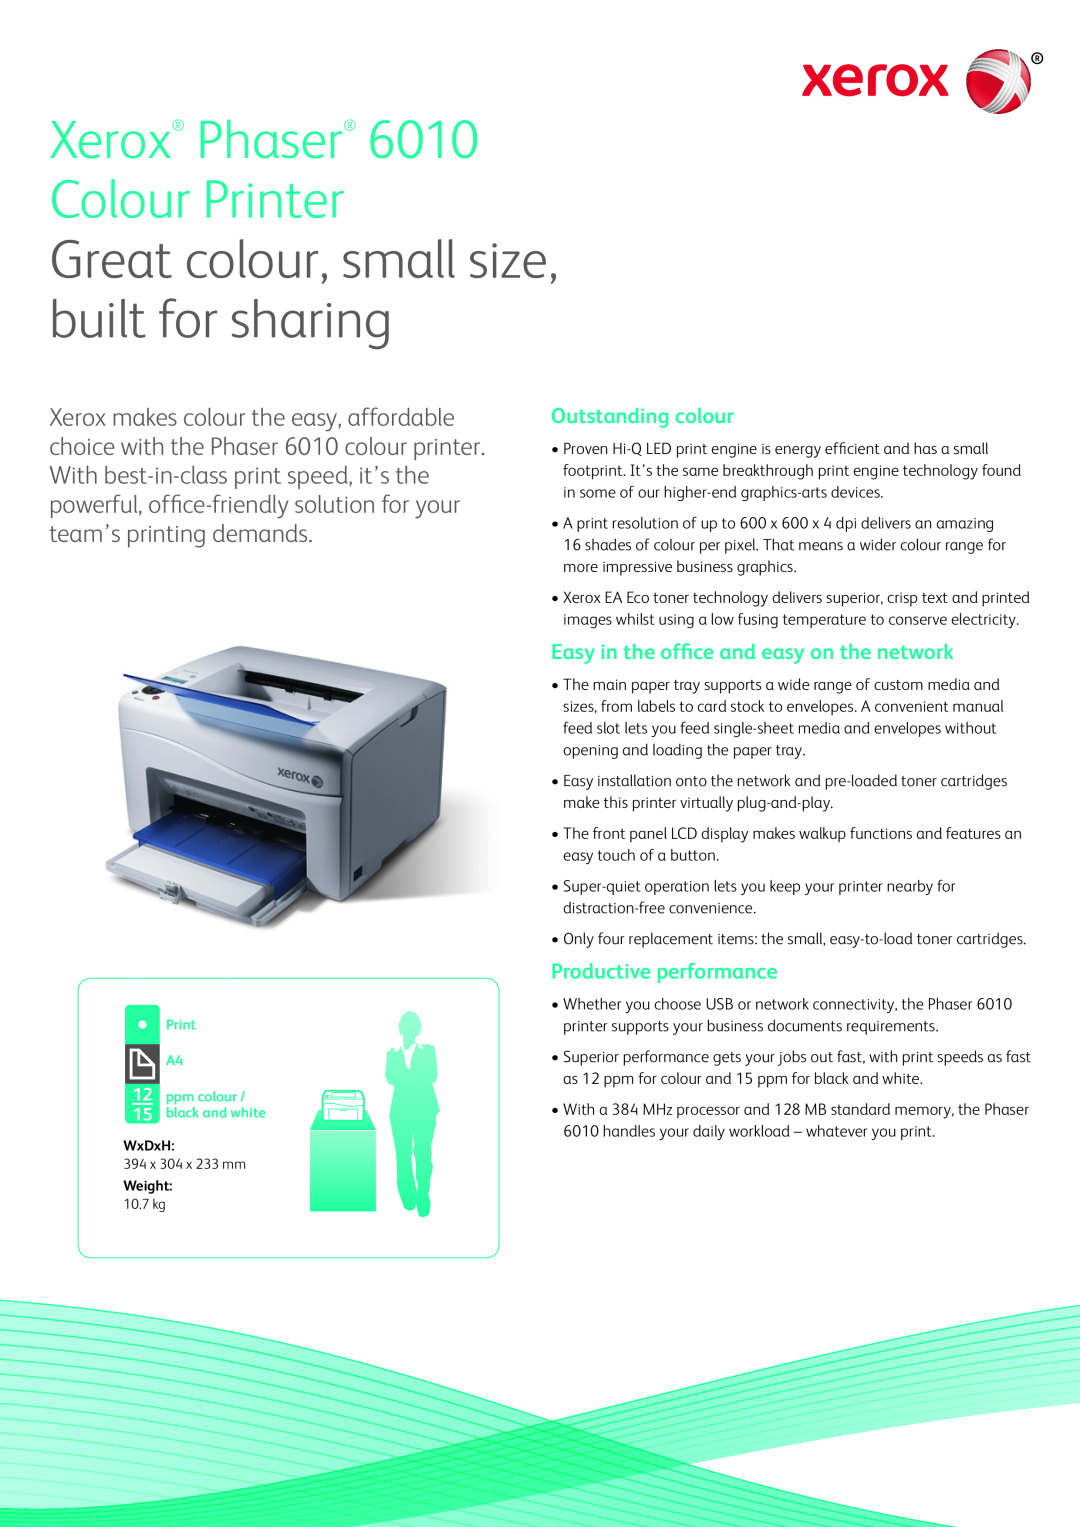 Xerox manual Great colour, small size, built for sharing, Xerox Phaser 6010 Colour Printer, Outstanding colour 